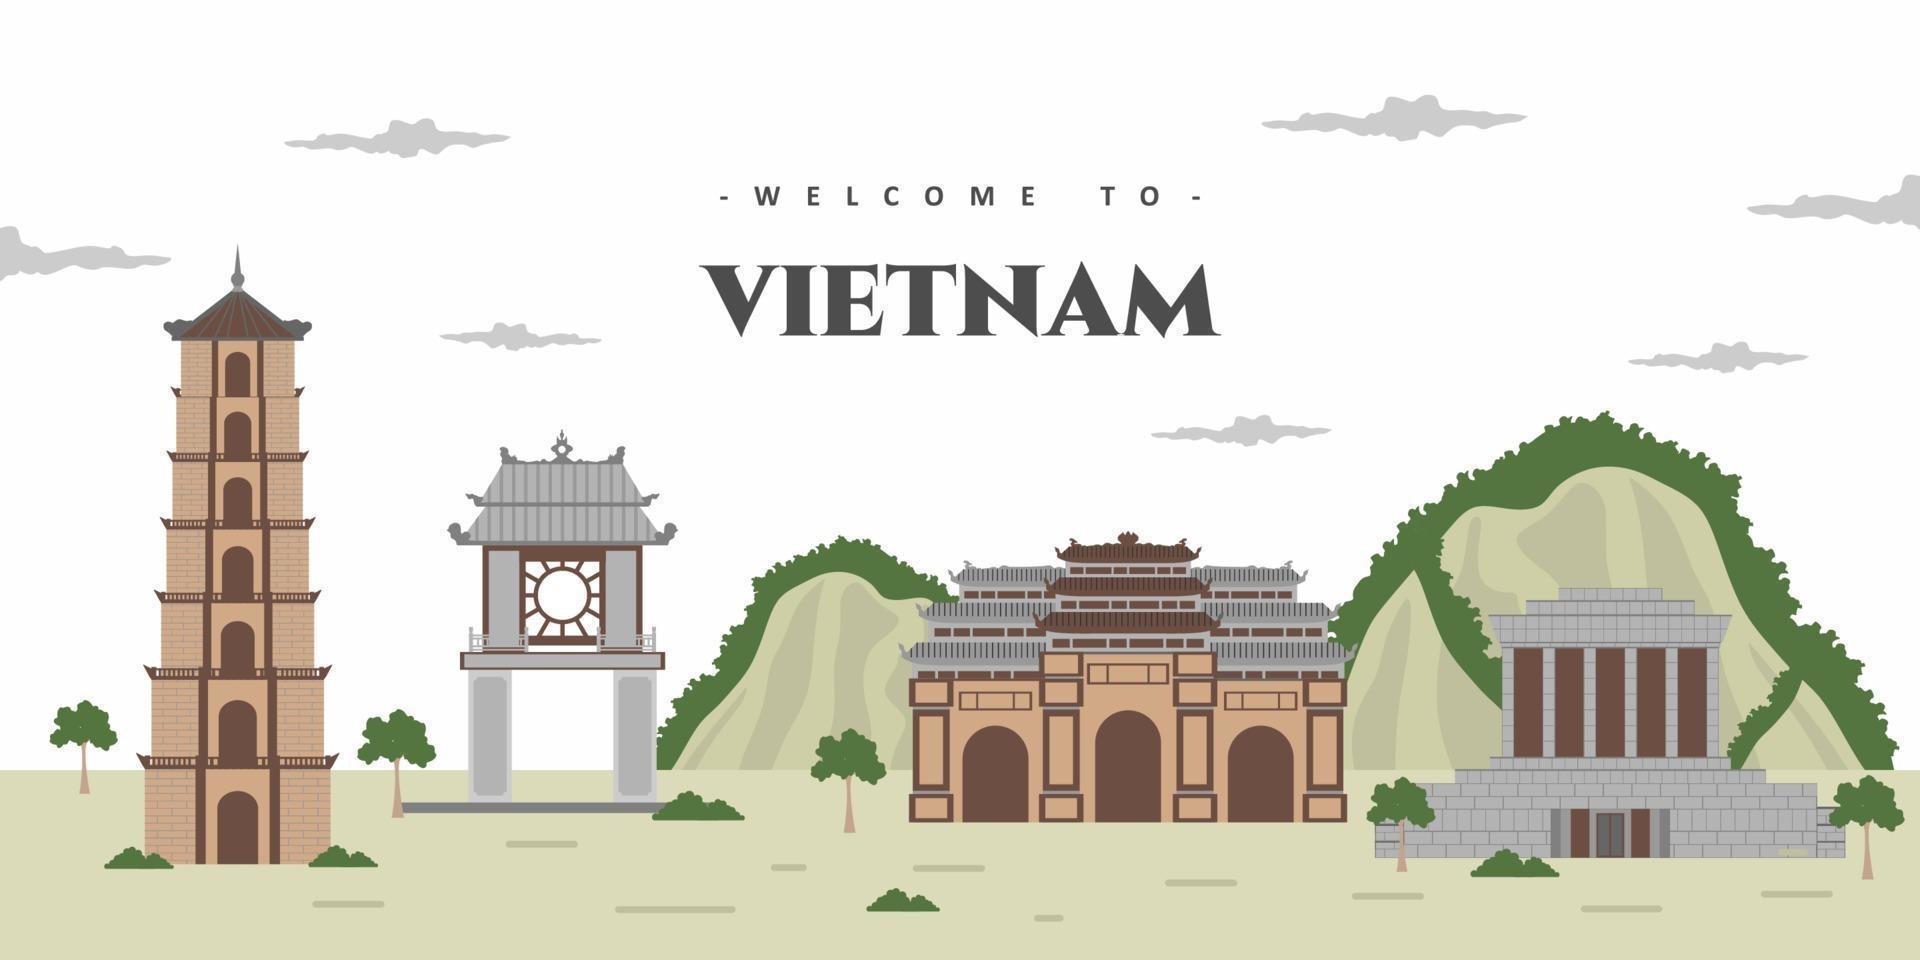 Vietnam  city landscape with historical world famous building landmark. Vietnam Landmarks, frame, travel and tourist attraction. World cities vacation travel sightseeing Asia collection. vector